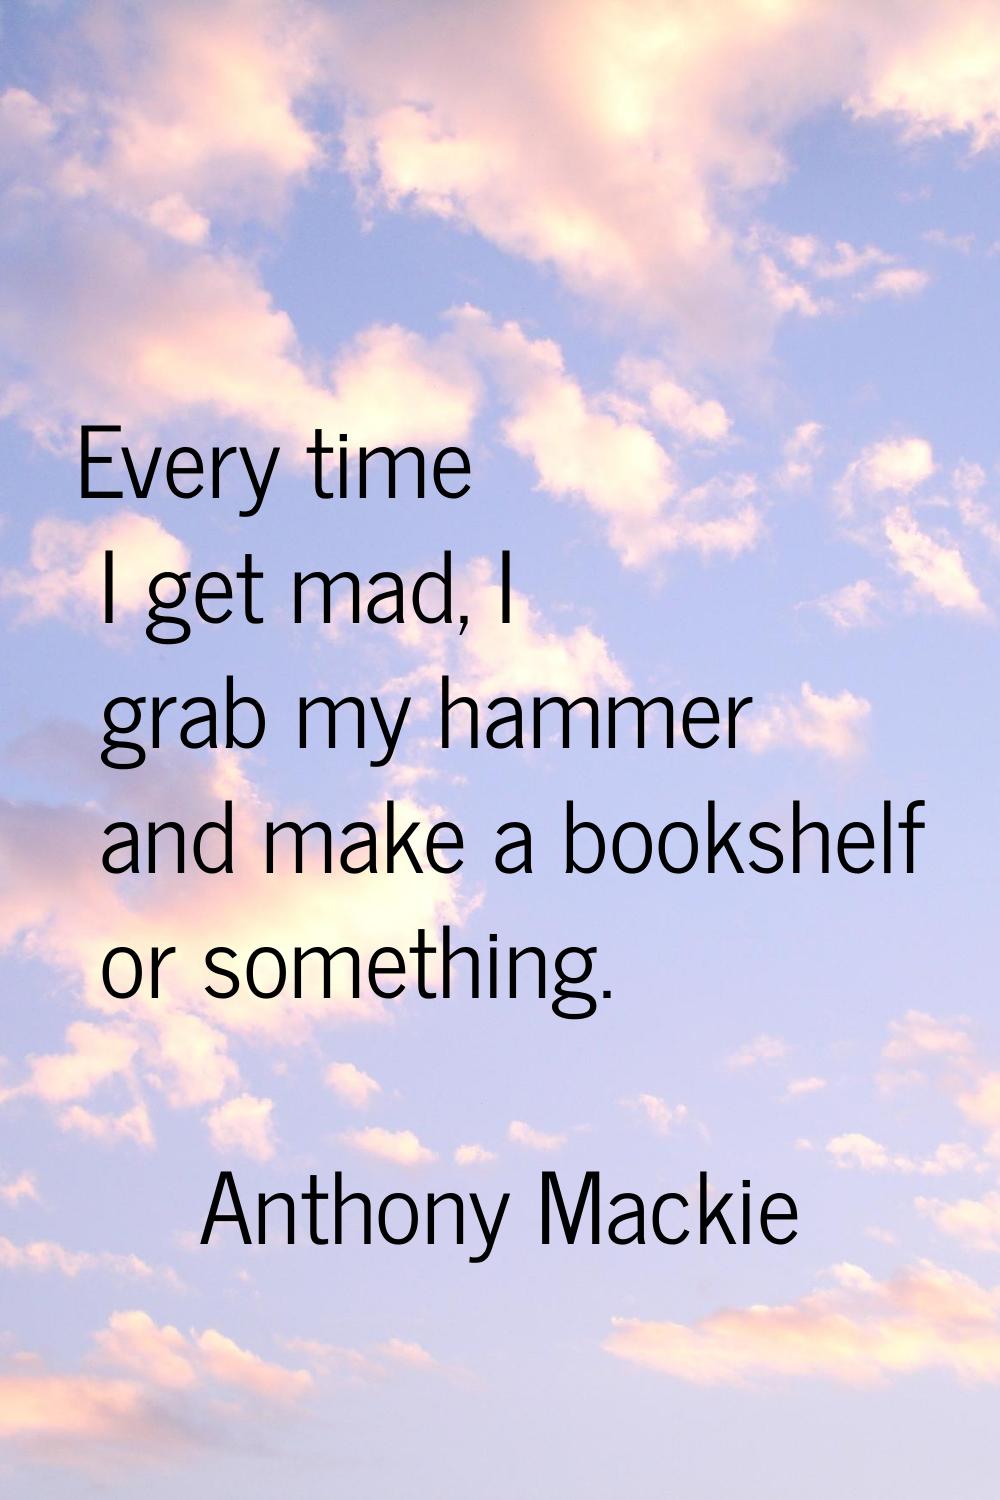 Every time I get mad, I grab my hammer and make a bookshelf or something.